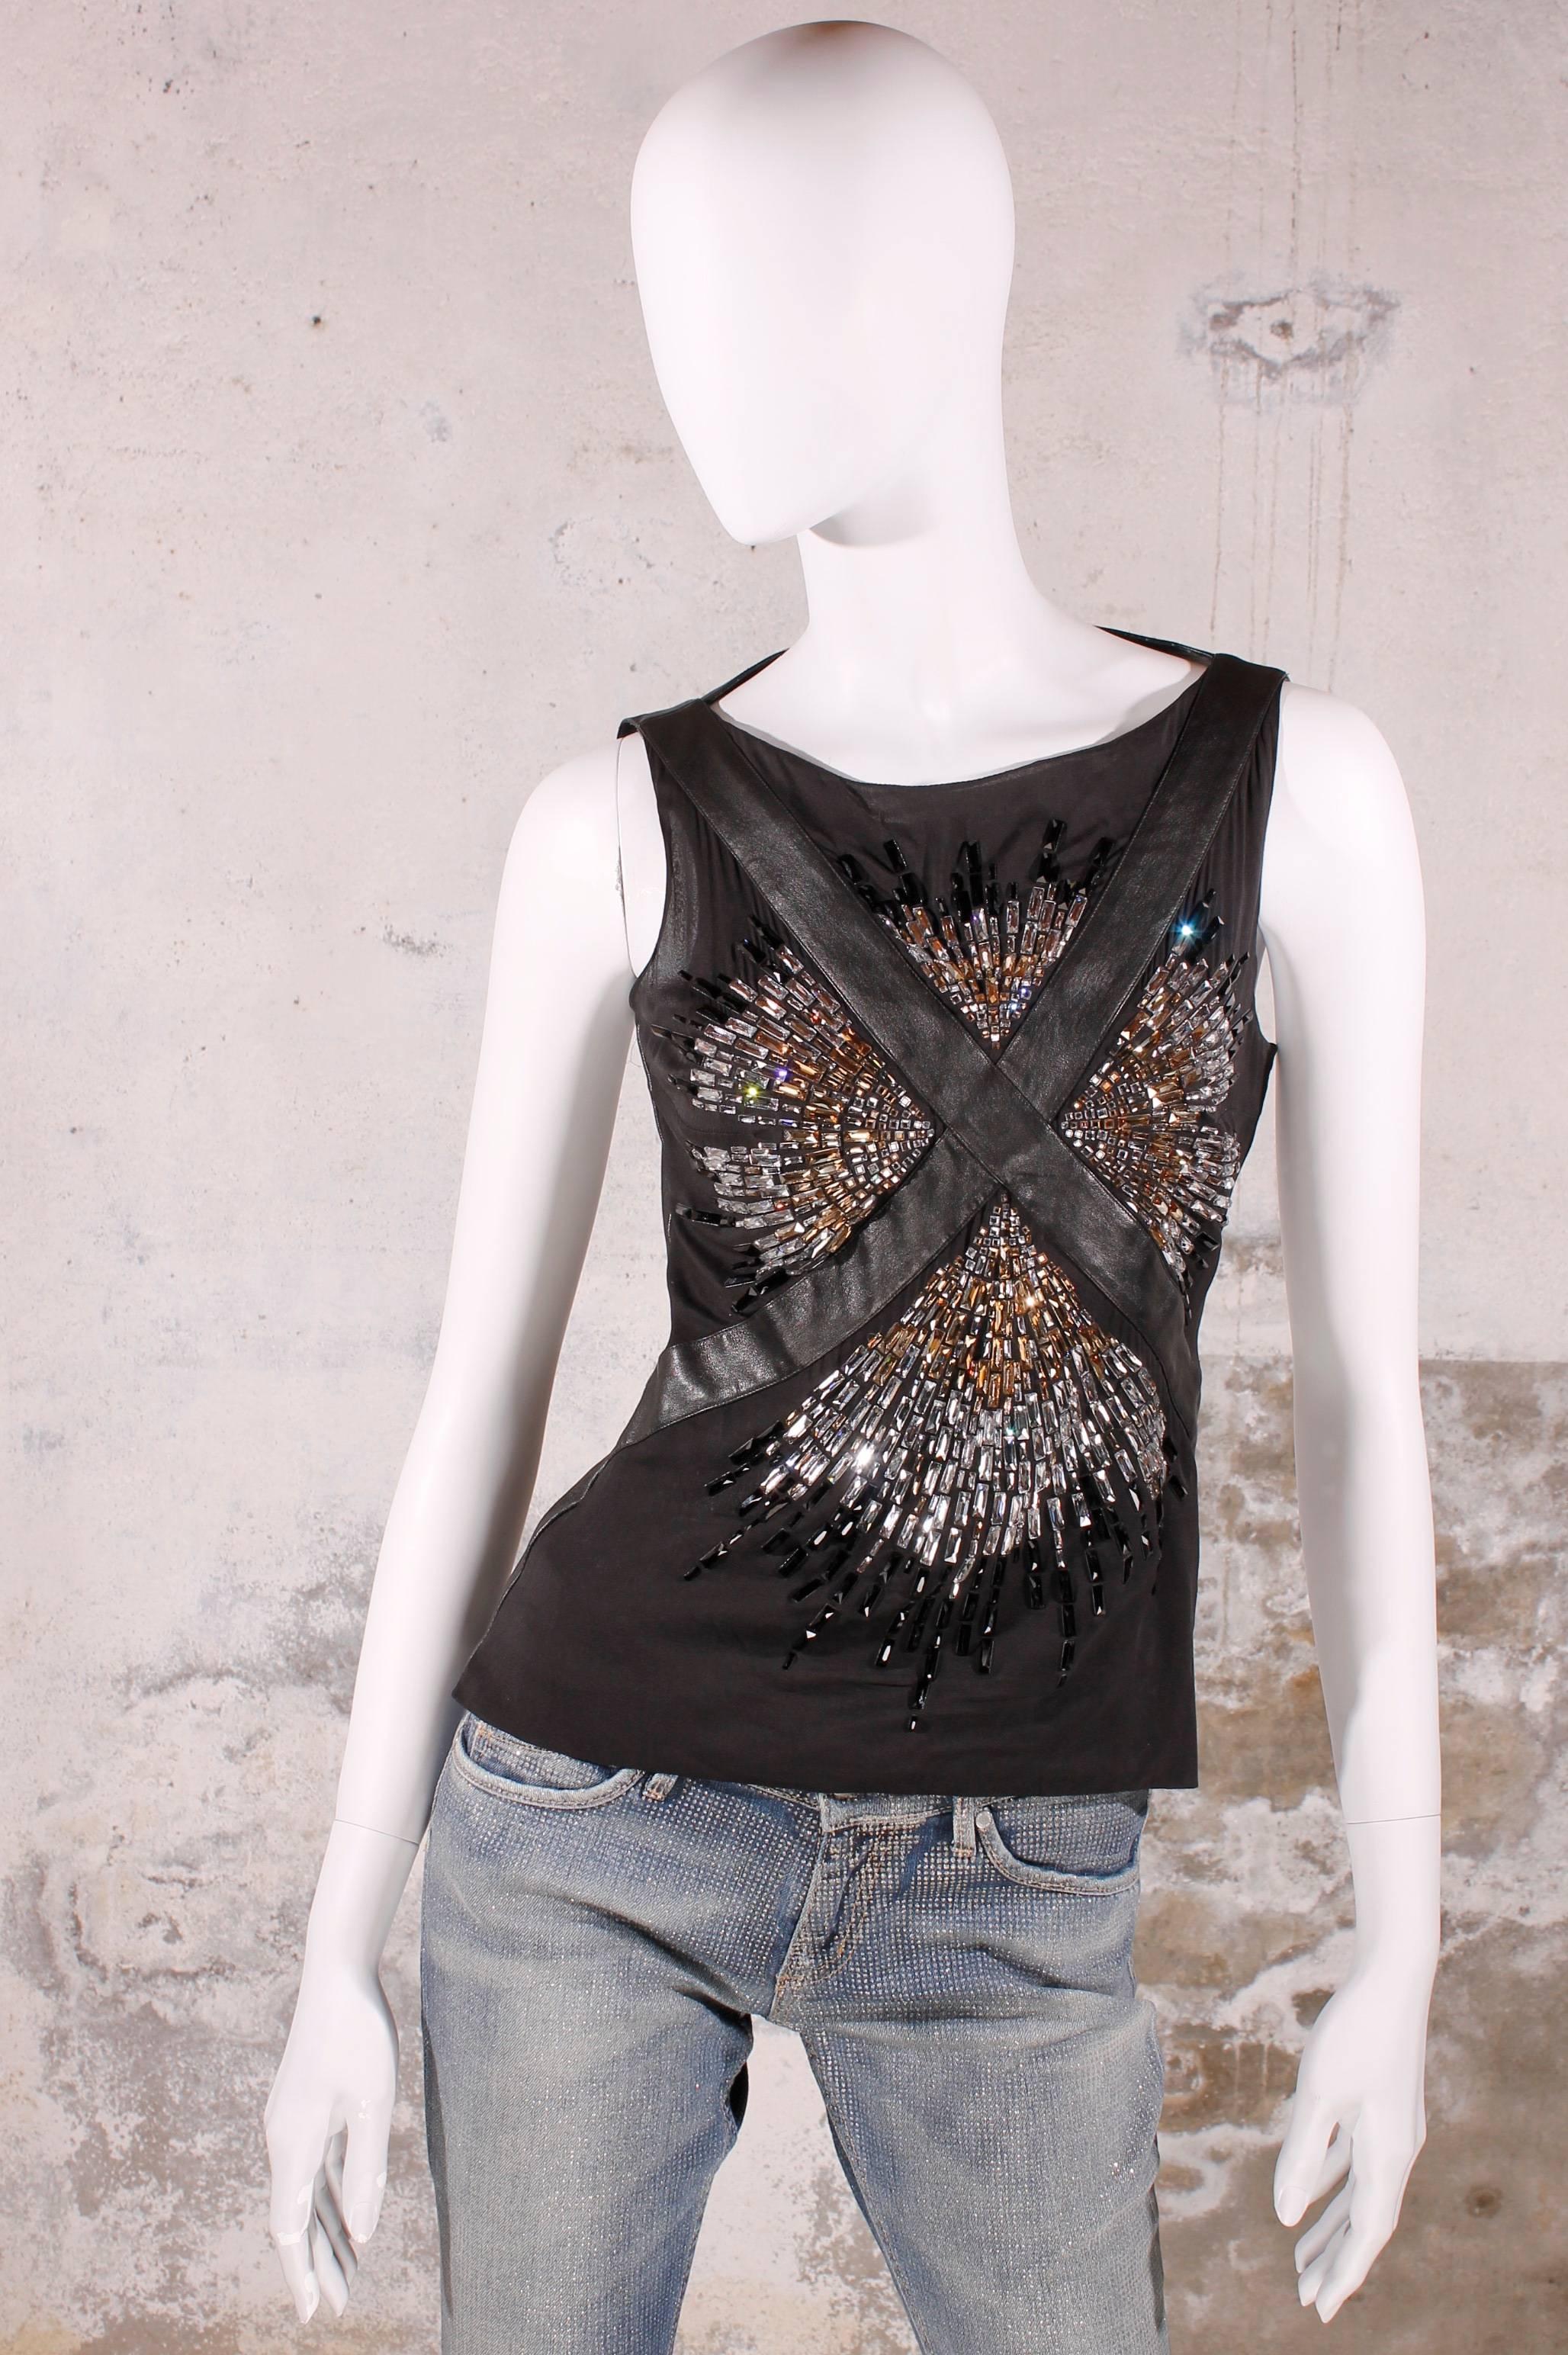 Gorgeous Jitrois couture Tank Top in black leather and black silk embroided with  rectangular Swarovski rhinestones in black and white.
A leather strap crosses the bust, from the shoulder to the waist. Rest of the front is made of black silk. 
The